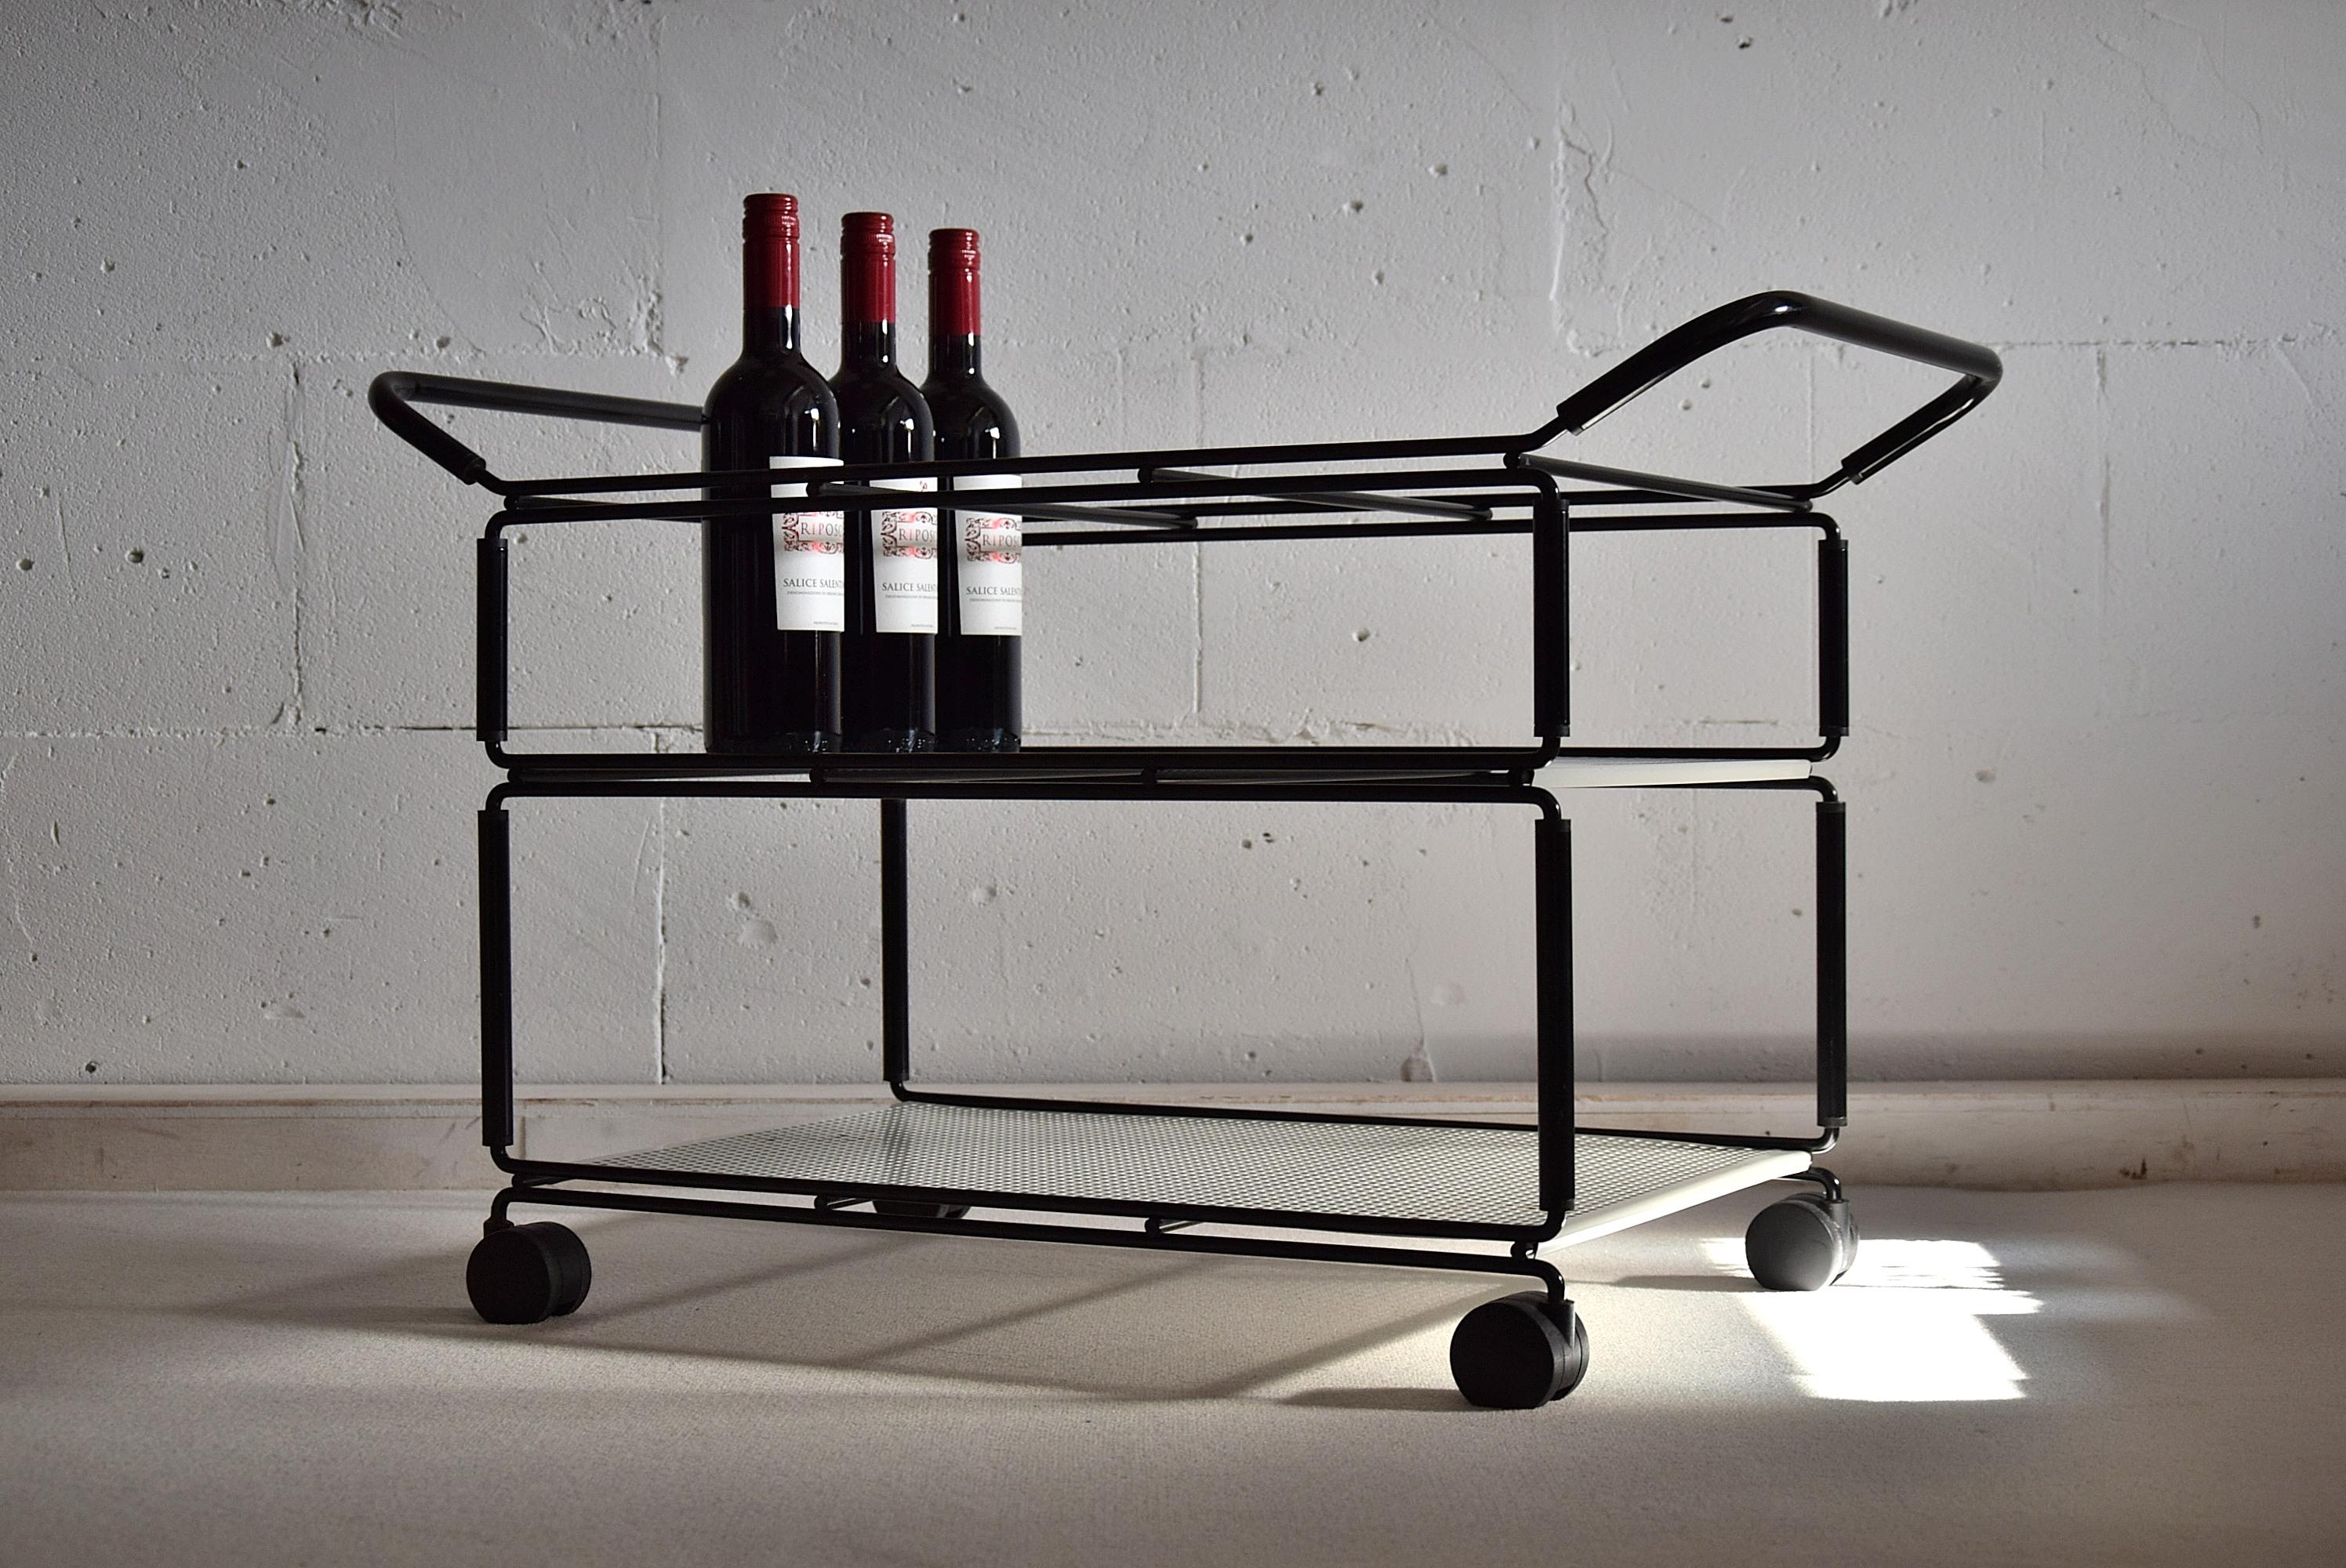 Stylish and elegant mid century modern black and white bar trolley in the style of Mathieu Matégot, designed and made in the 1960s.

The top trier can be removed and placed in the centre as can be seen in the pictures.

The trolley is in good